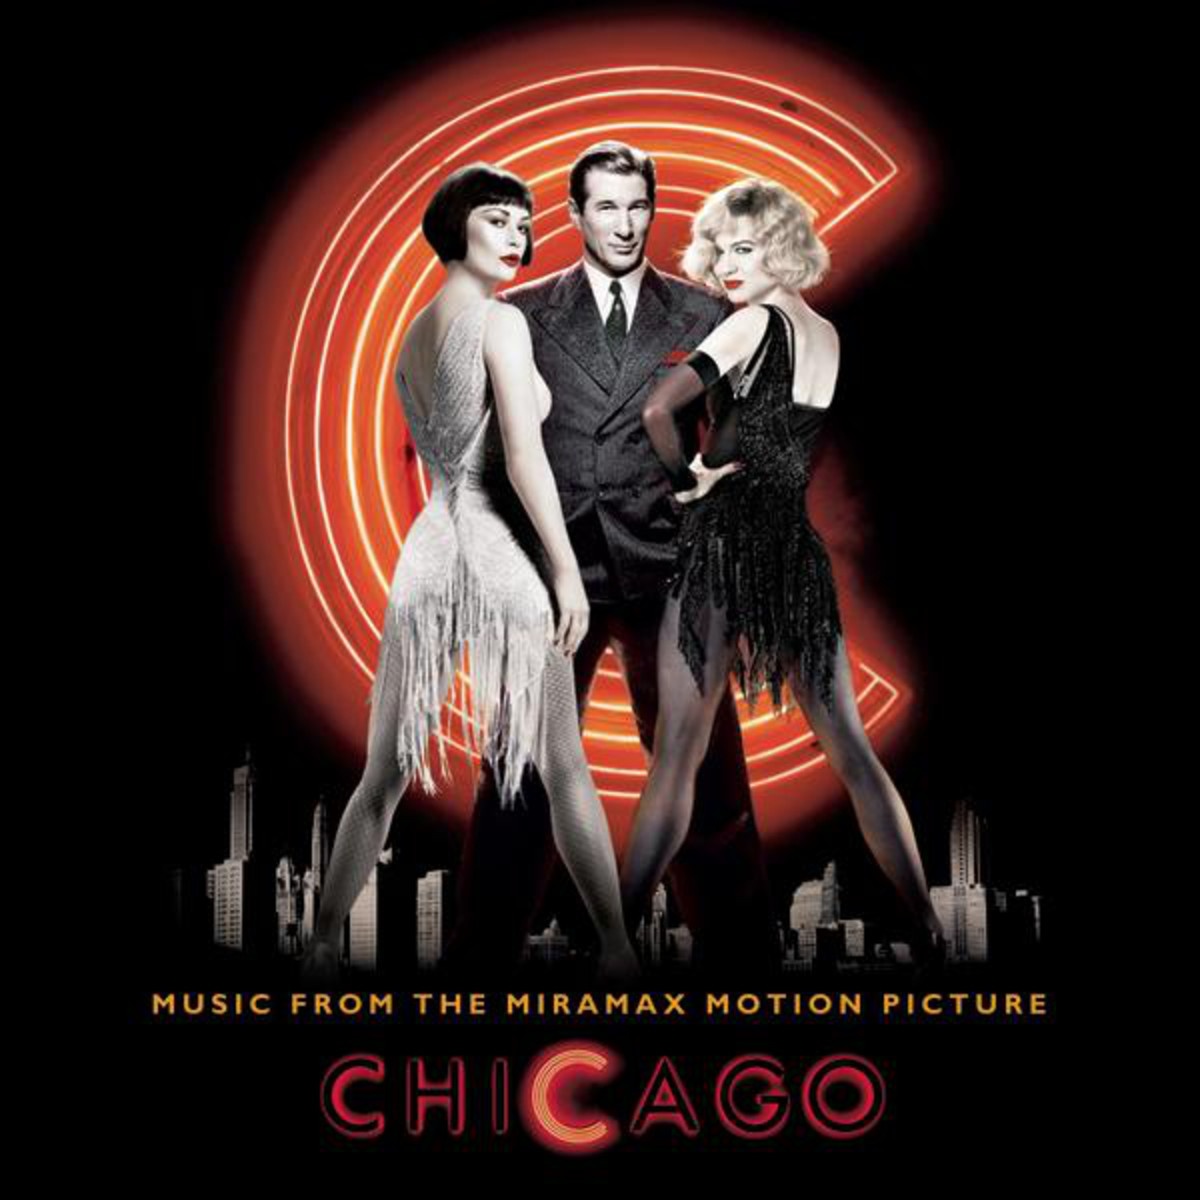 Chicago (Music from the Miramax Motion Picture)